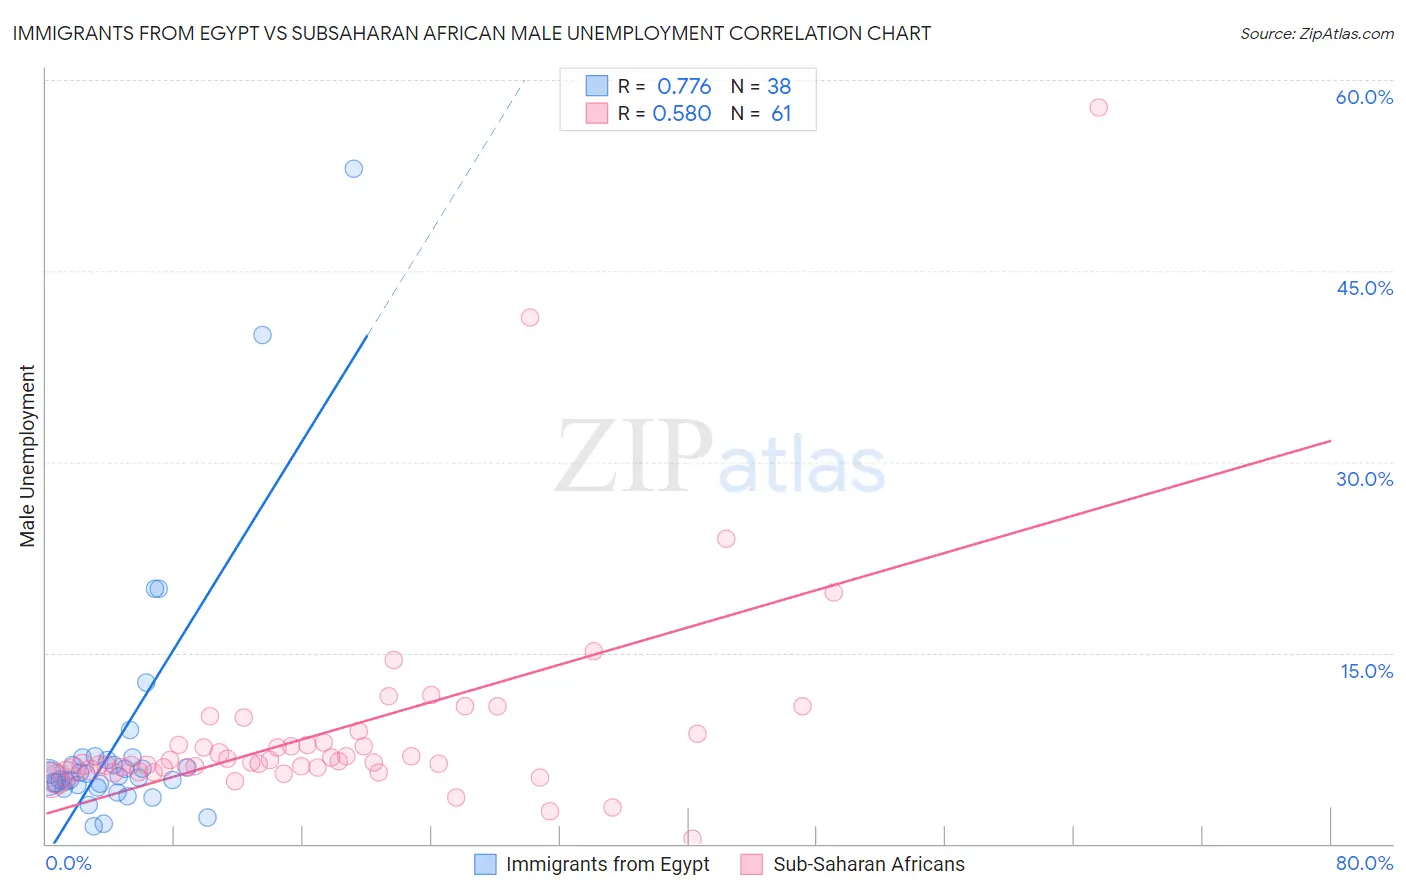 Immigrants from Egypt vs Subsaharan African Male Unemployment